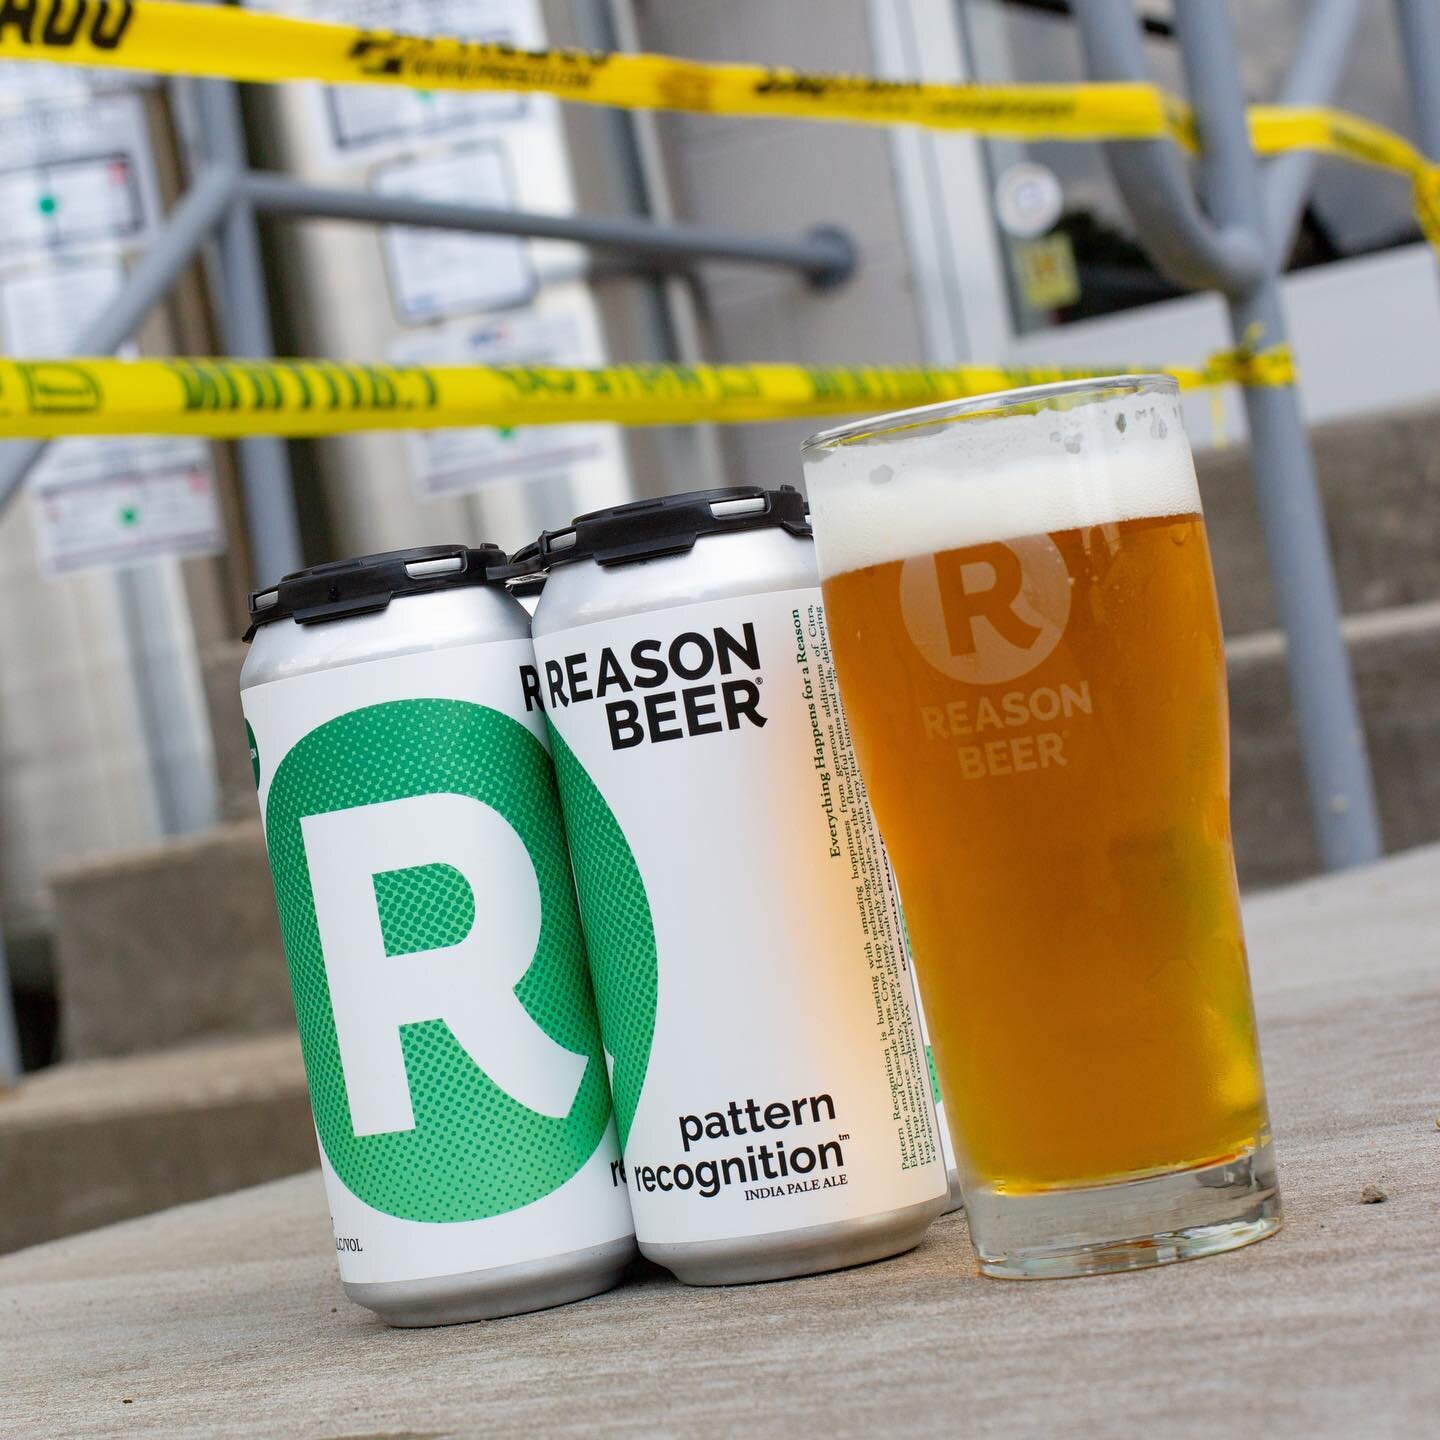 Caution: the beer and the concrete pad are both very fresh. #reasonbeer #patternrecognition #ipa #charlottesvillebeer #vacraftbeer